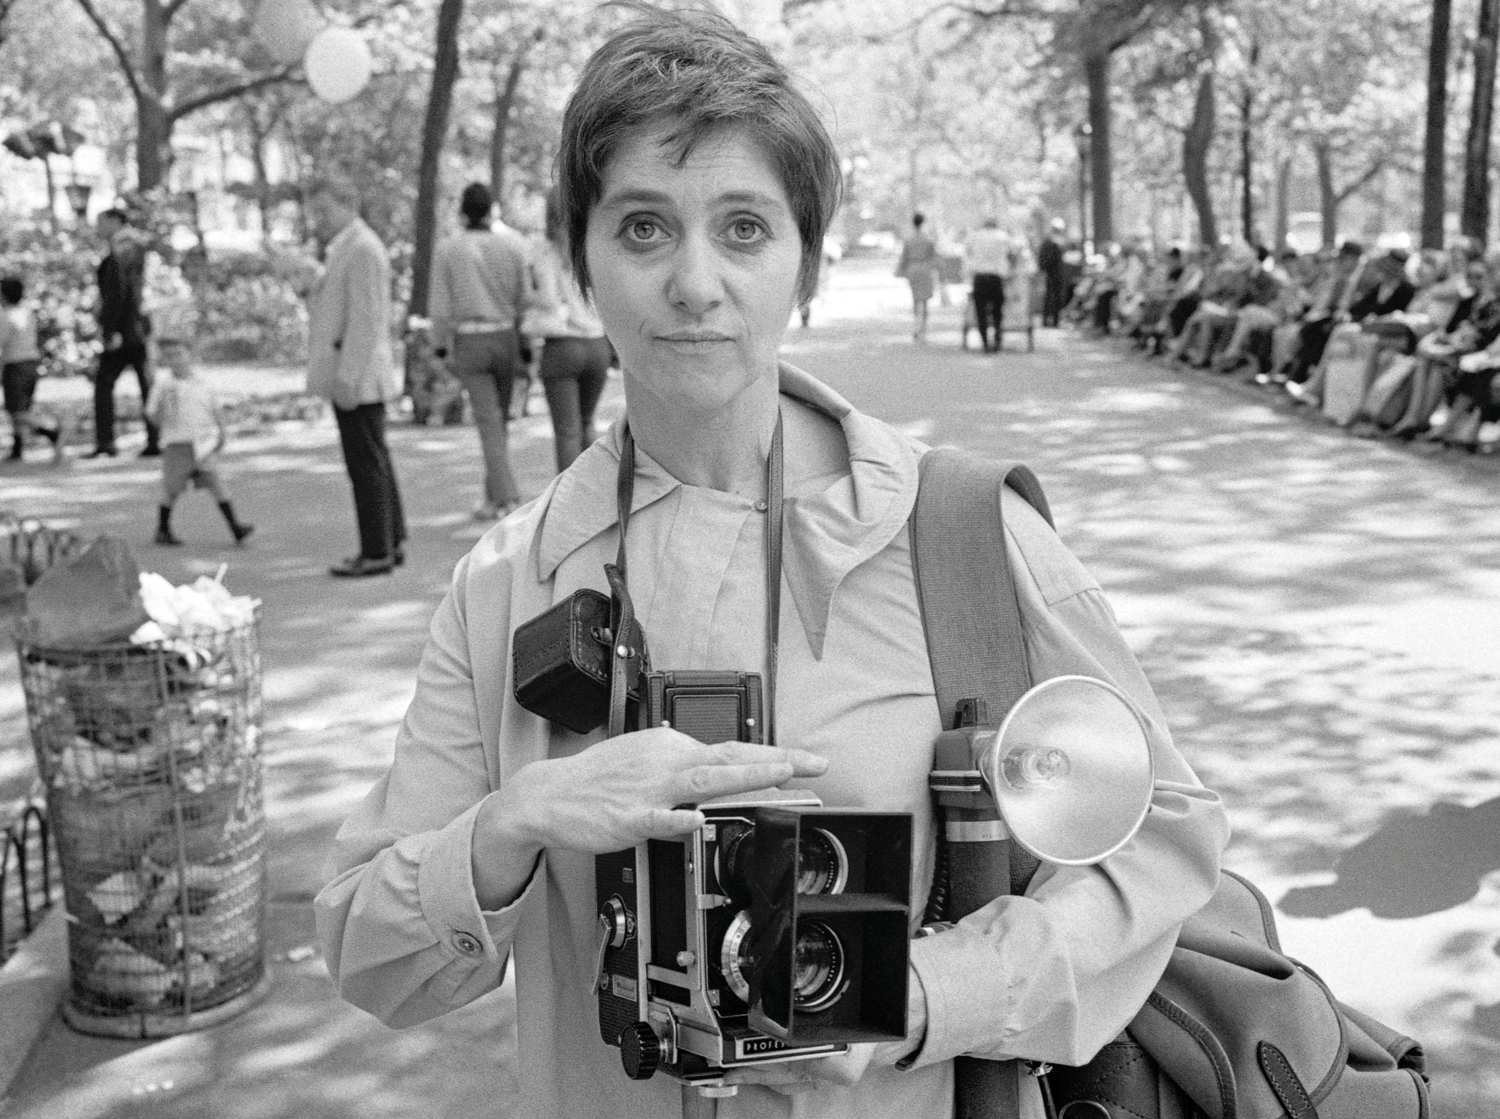 Diane Arbus standing in a park holding cameras